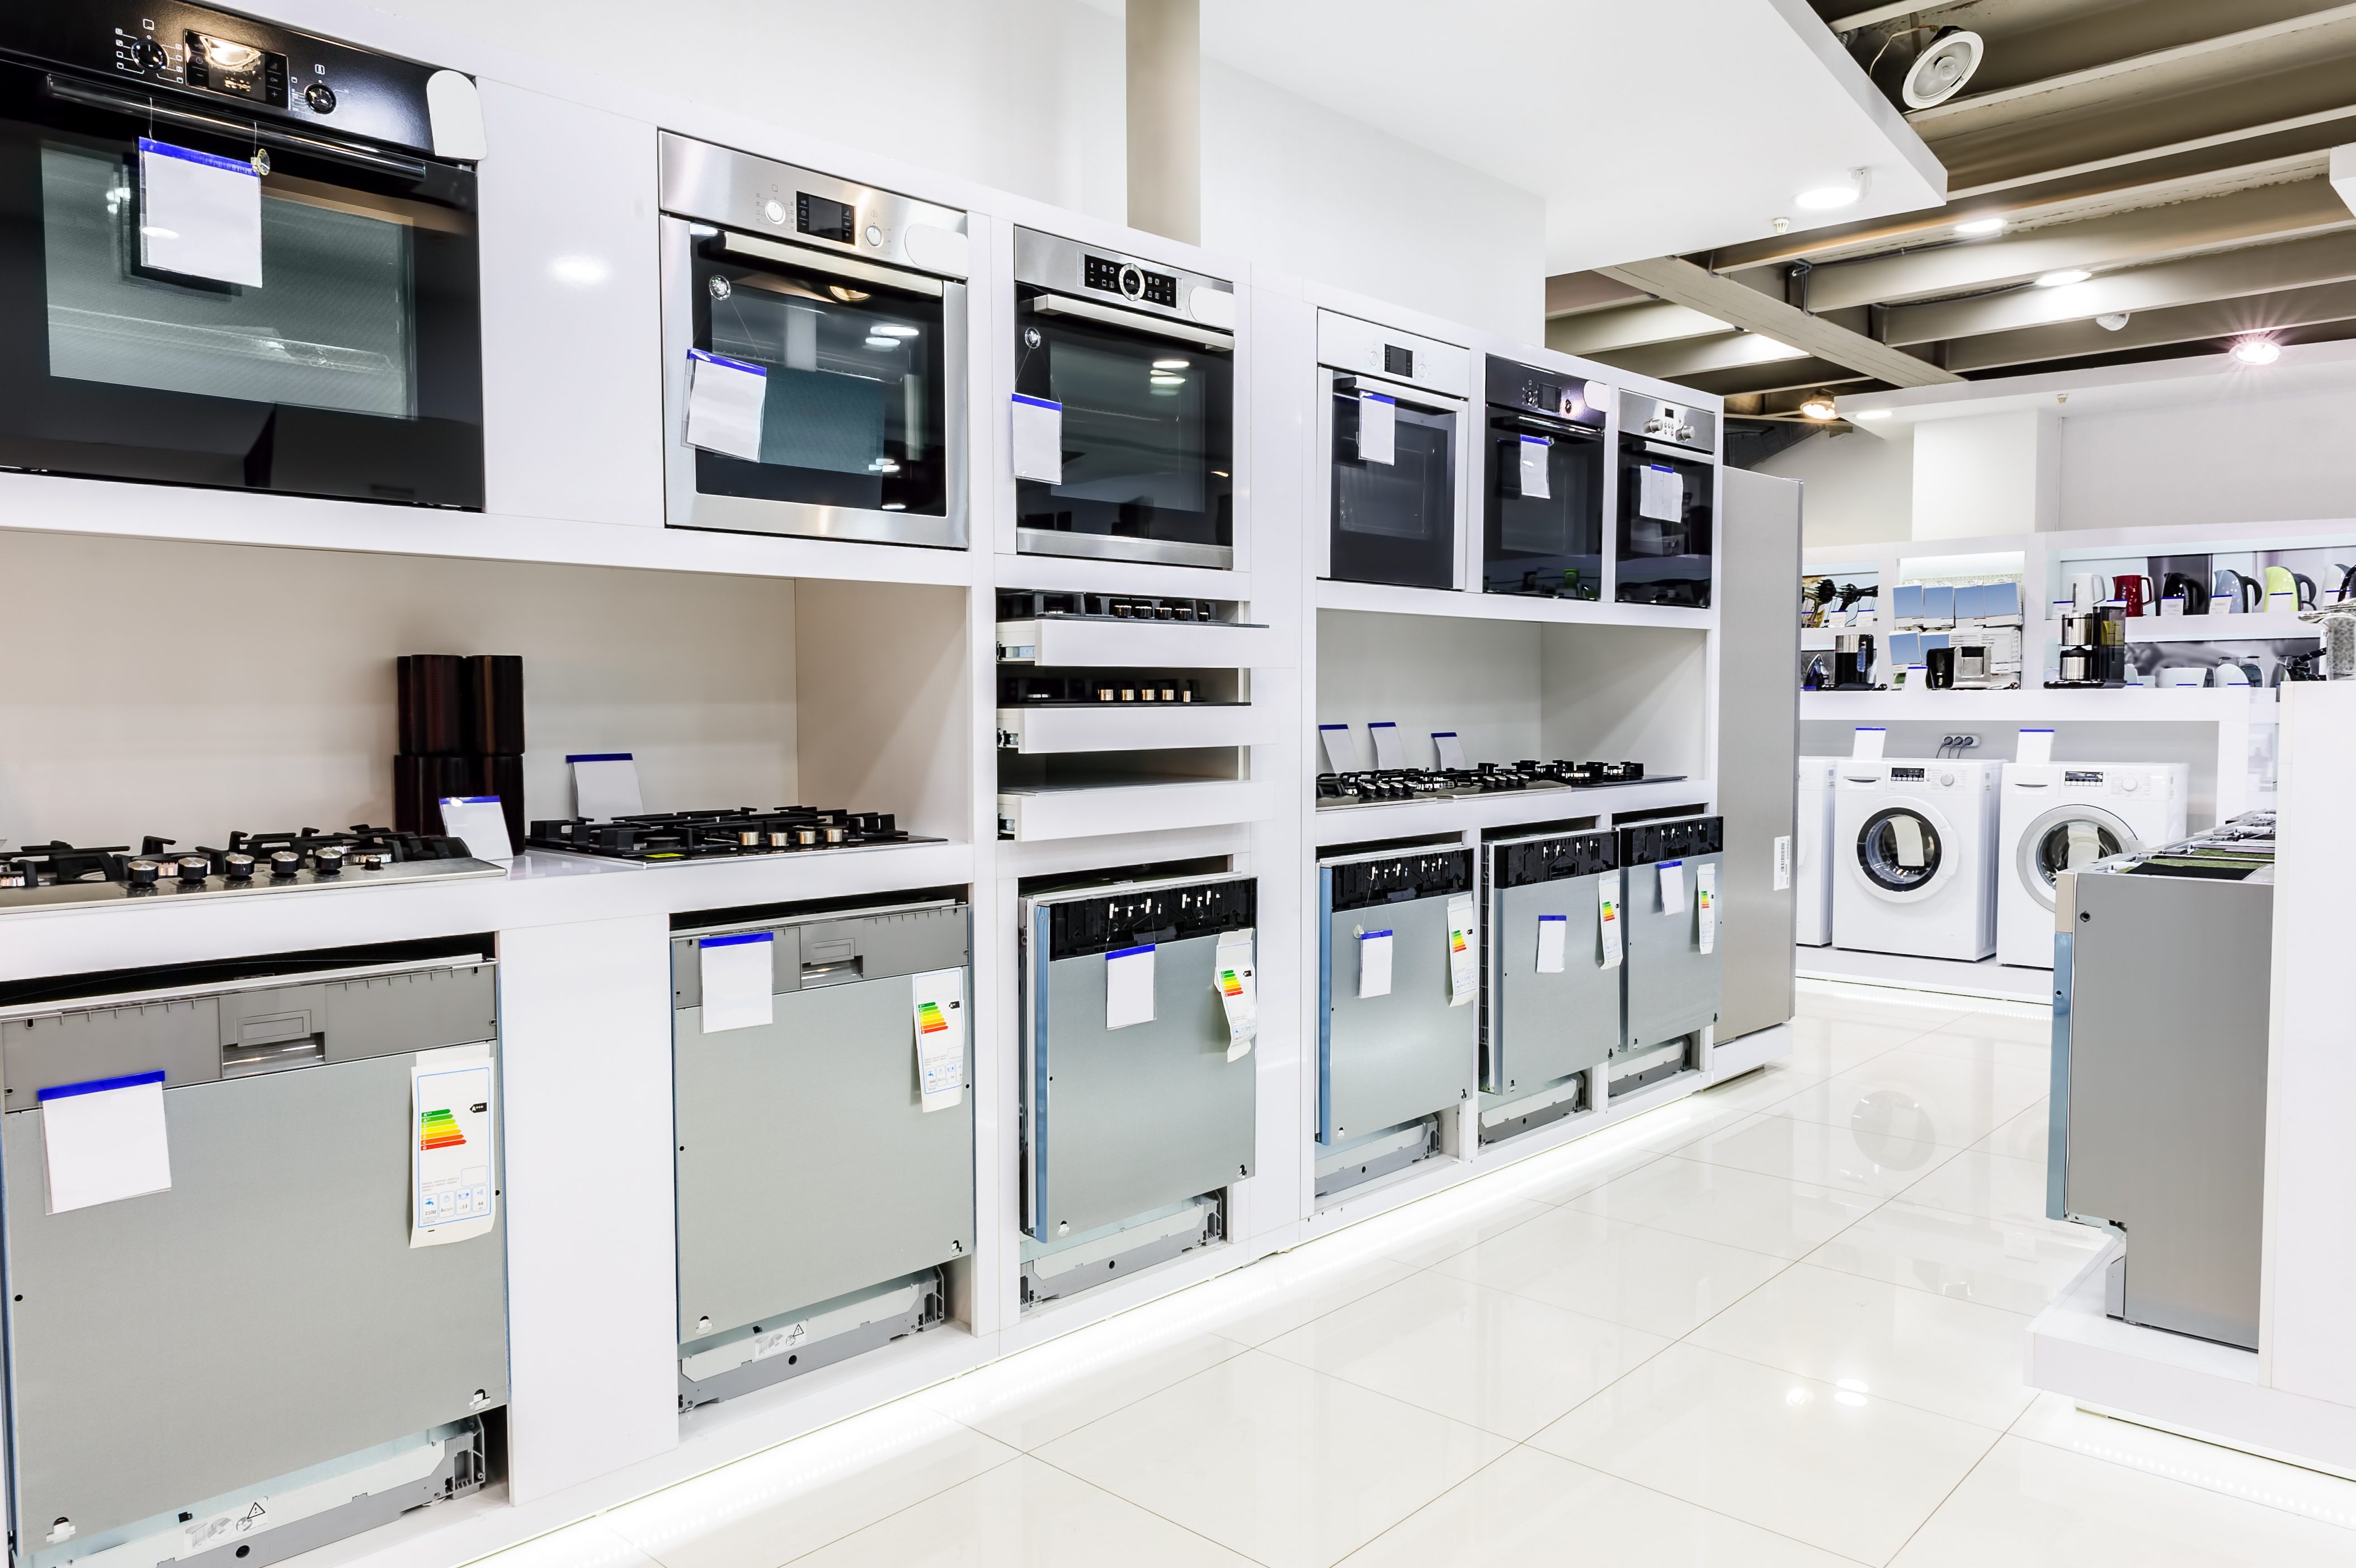 reasons-to-rethink-buying-appliances-at-superstores-reader-s-digest